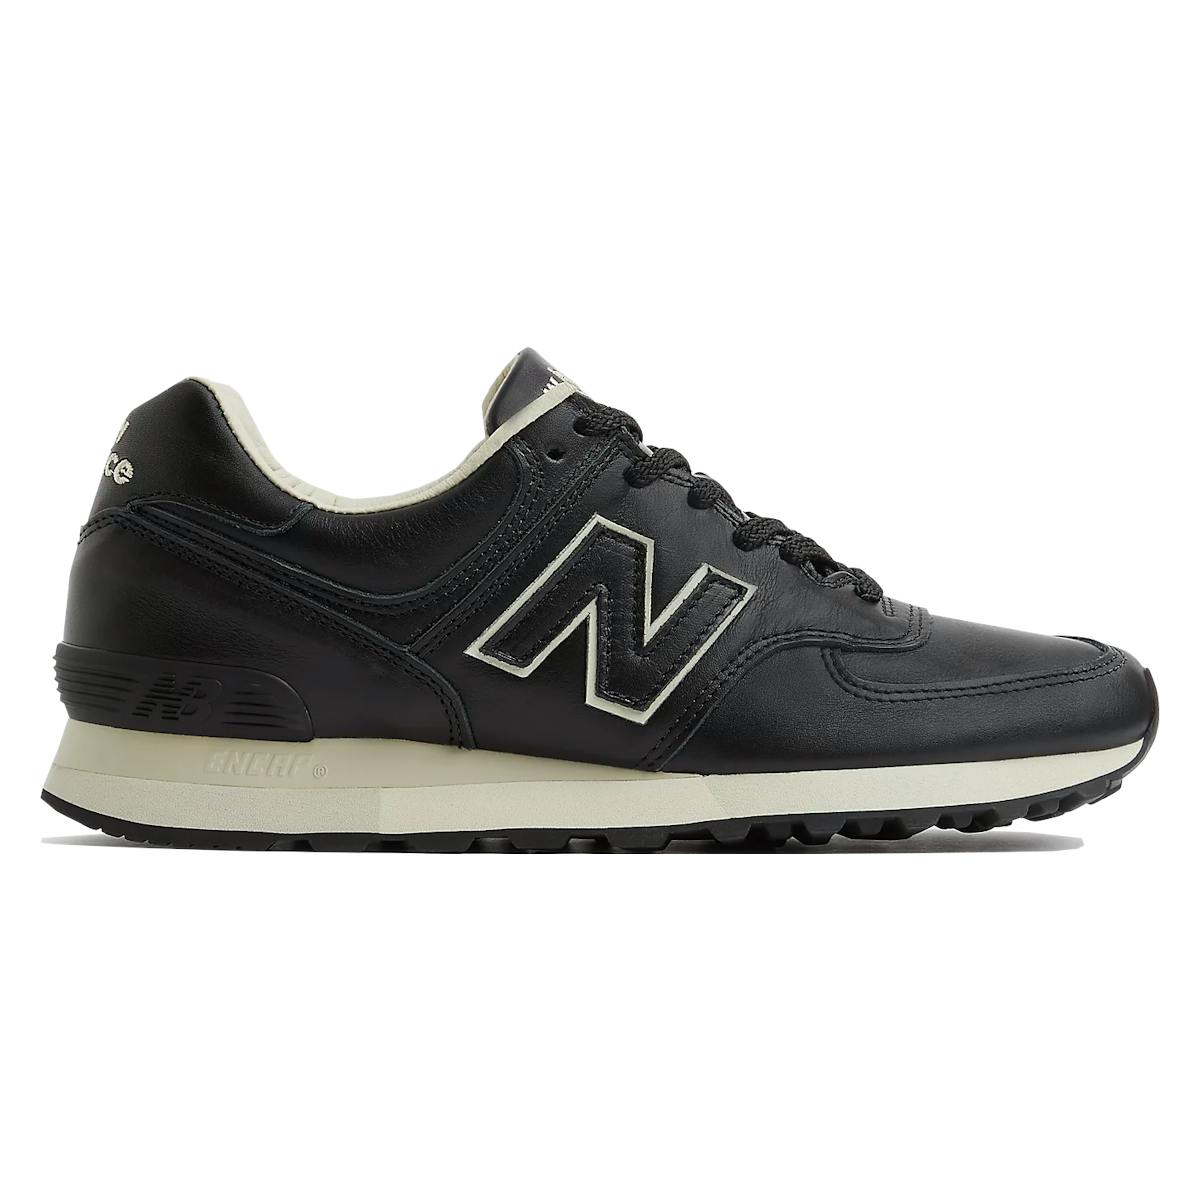 New Balance 576 Made In UK "Black Cement"